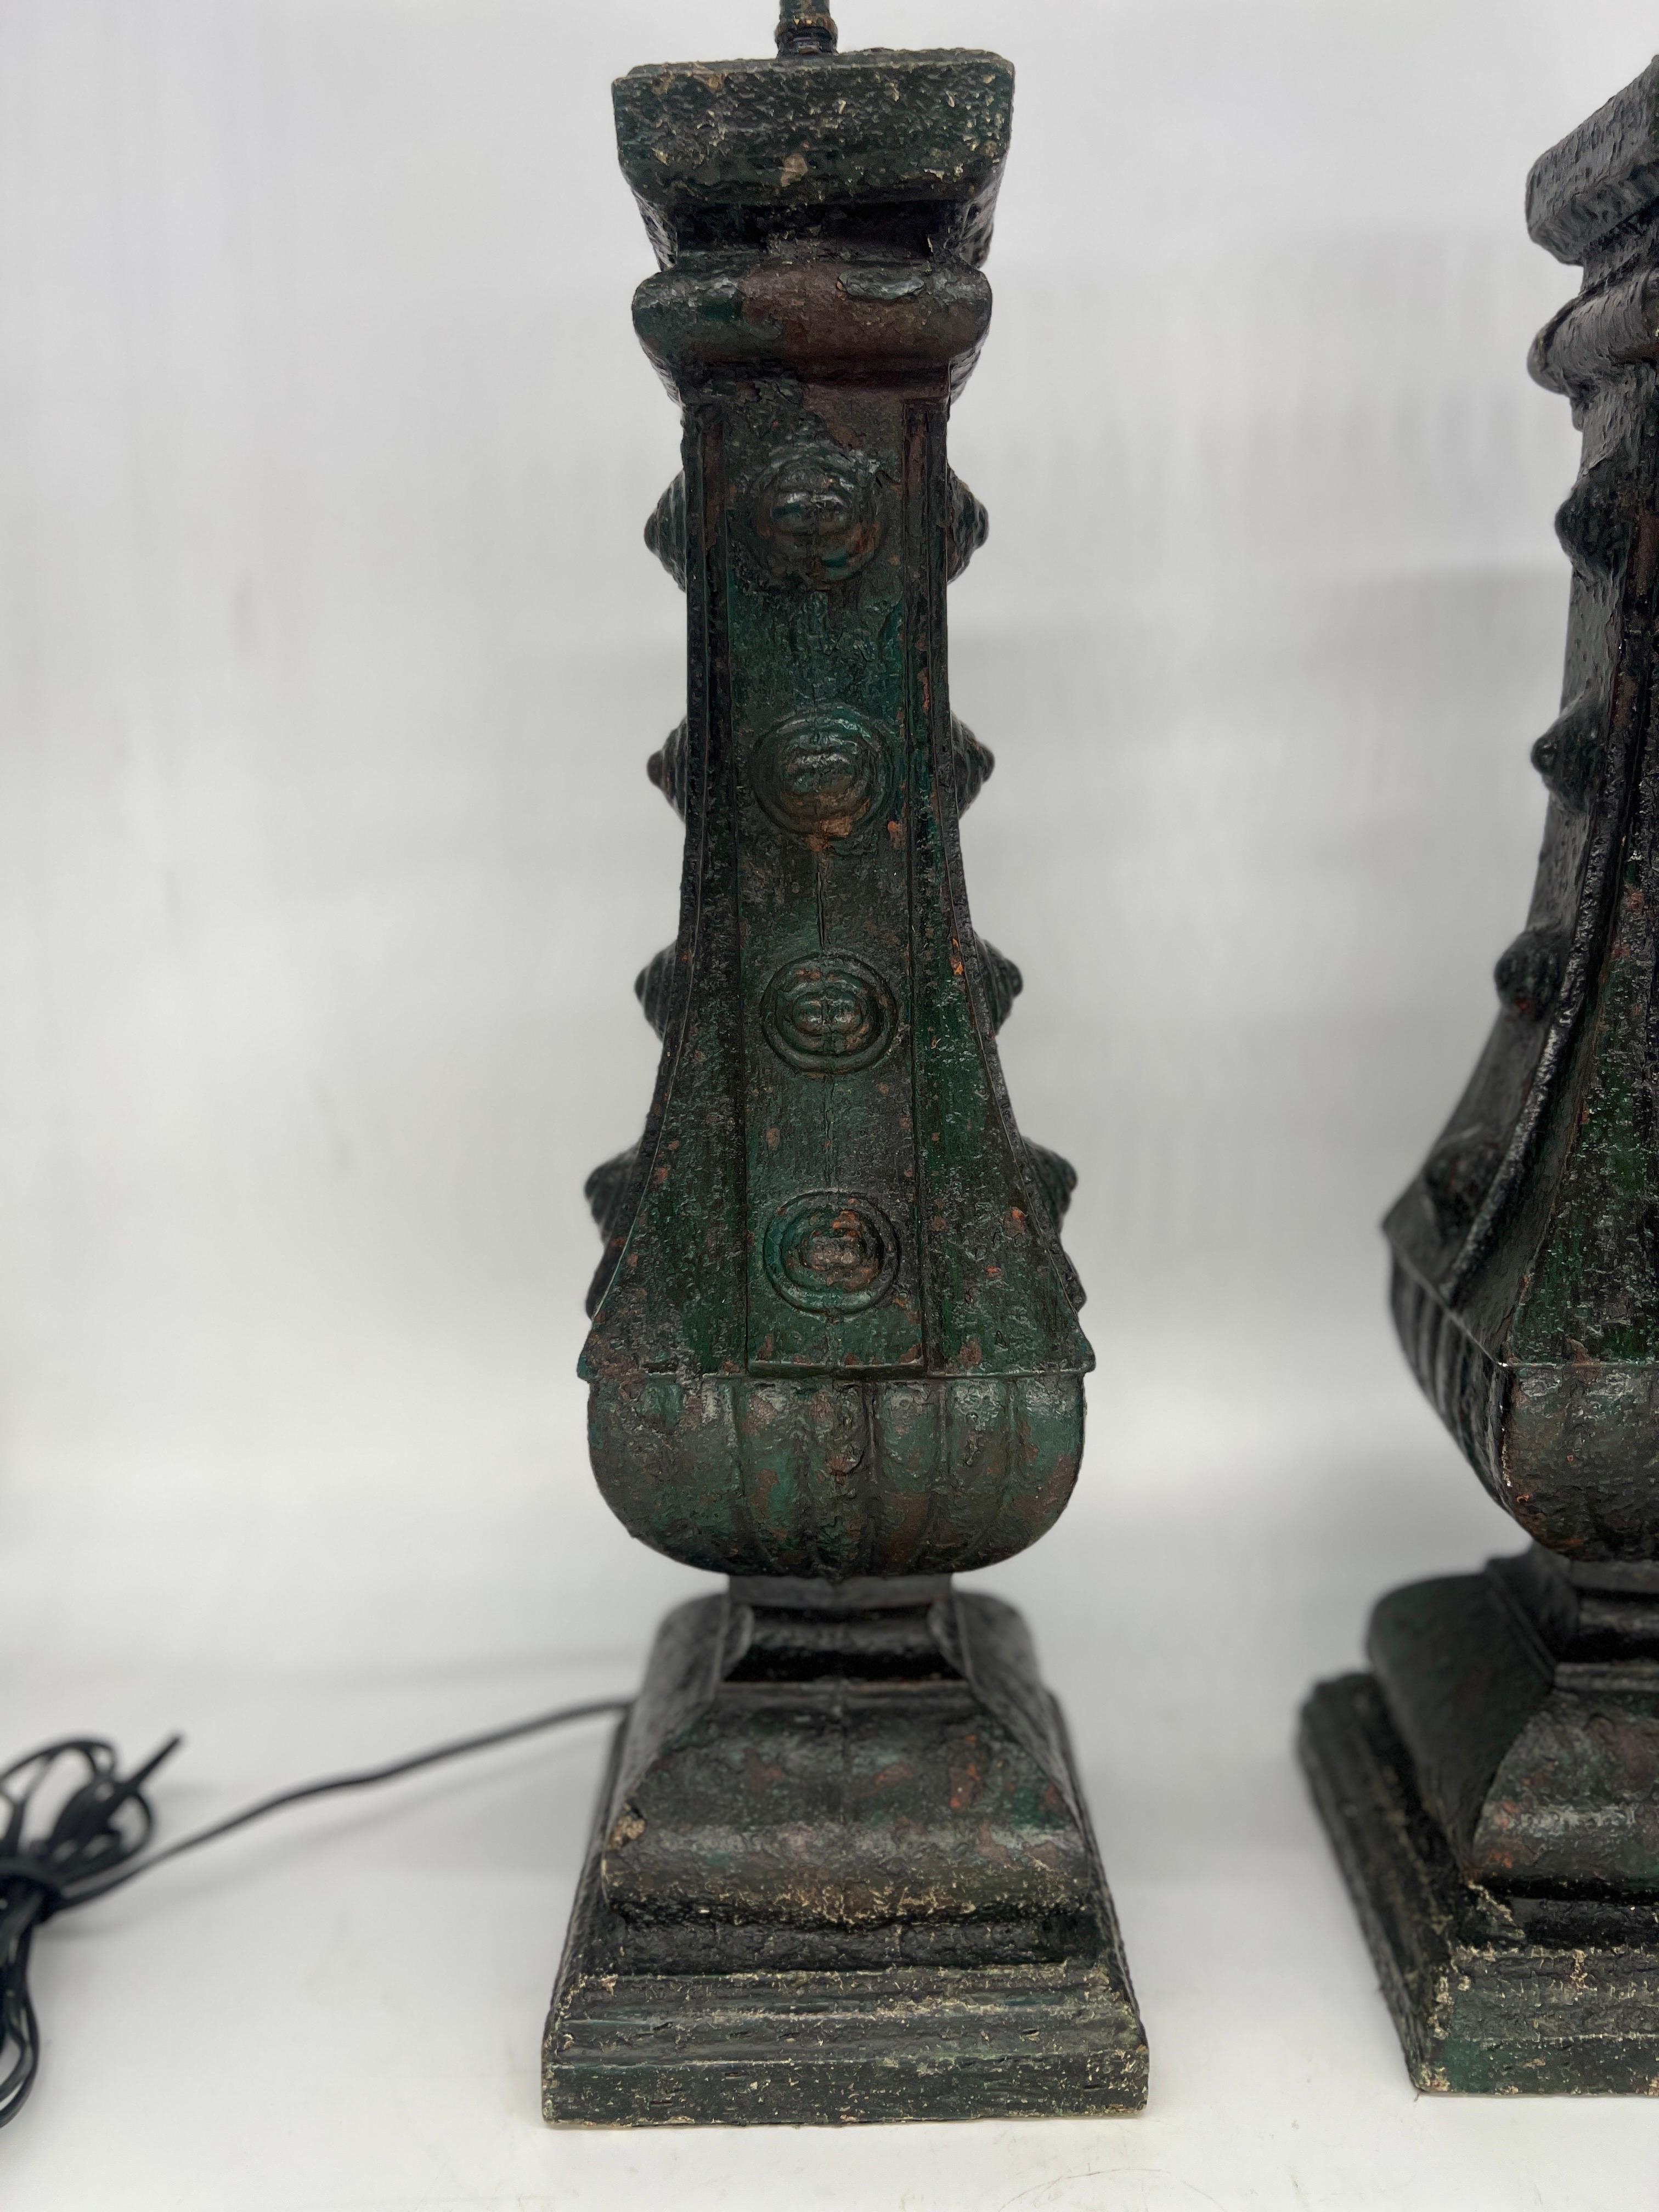 French, 19th century or earlier. 

Each lamp features an authentic cast iron architectural fragment, seamlessly transformed into a lamp base with the utmost care and craftsmanship. The cast iron, with its aged patina and period green paint, bears